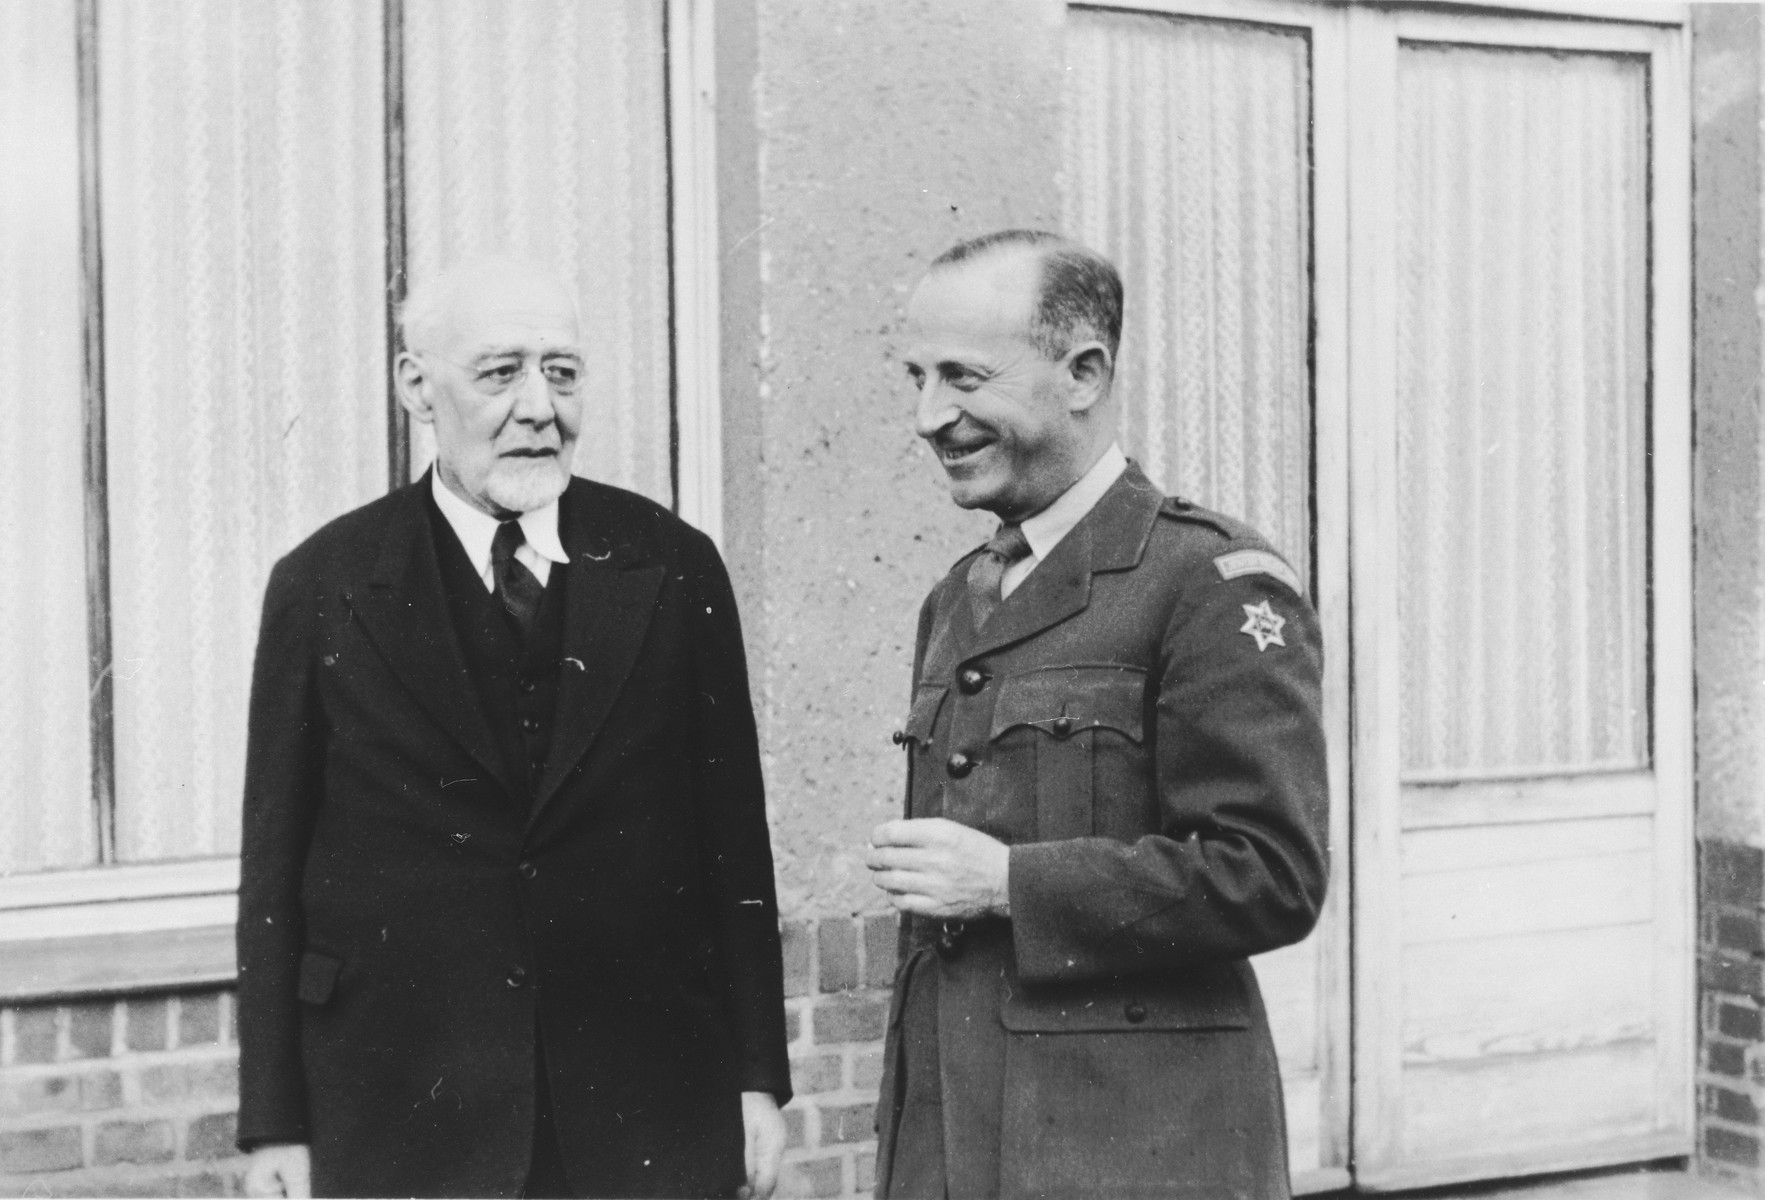 Rabbi Leo Baeck (left) poses with Ernst G. Lowenthal (right) during his three week visit to Germany.

Baeck was greeted at the airport by Norbert Wollheim, Chairman of the Central Committee of Jews in the British Zone.  Baeck's trip included participation in an evangelical congress in Darmstadt on October 12, as well as numerous appearances before local Jewish communities.

Ernst G. Lowenthal was born in Koln, Germany in 1904.  After receiving his doctorate in sociology, he worked for the Central Association of German Citizens of the Jewish Faith from 1929 to 1938.  He also edited the Journal for the History of the Jews in Germany.  In 1939 he immigrated to England.  A year after the war he returned to Germany, where among other roles, he served as director of the Jewish Relief Unit in the British Occupation Zone from 1947 to 1948.